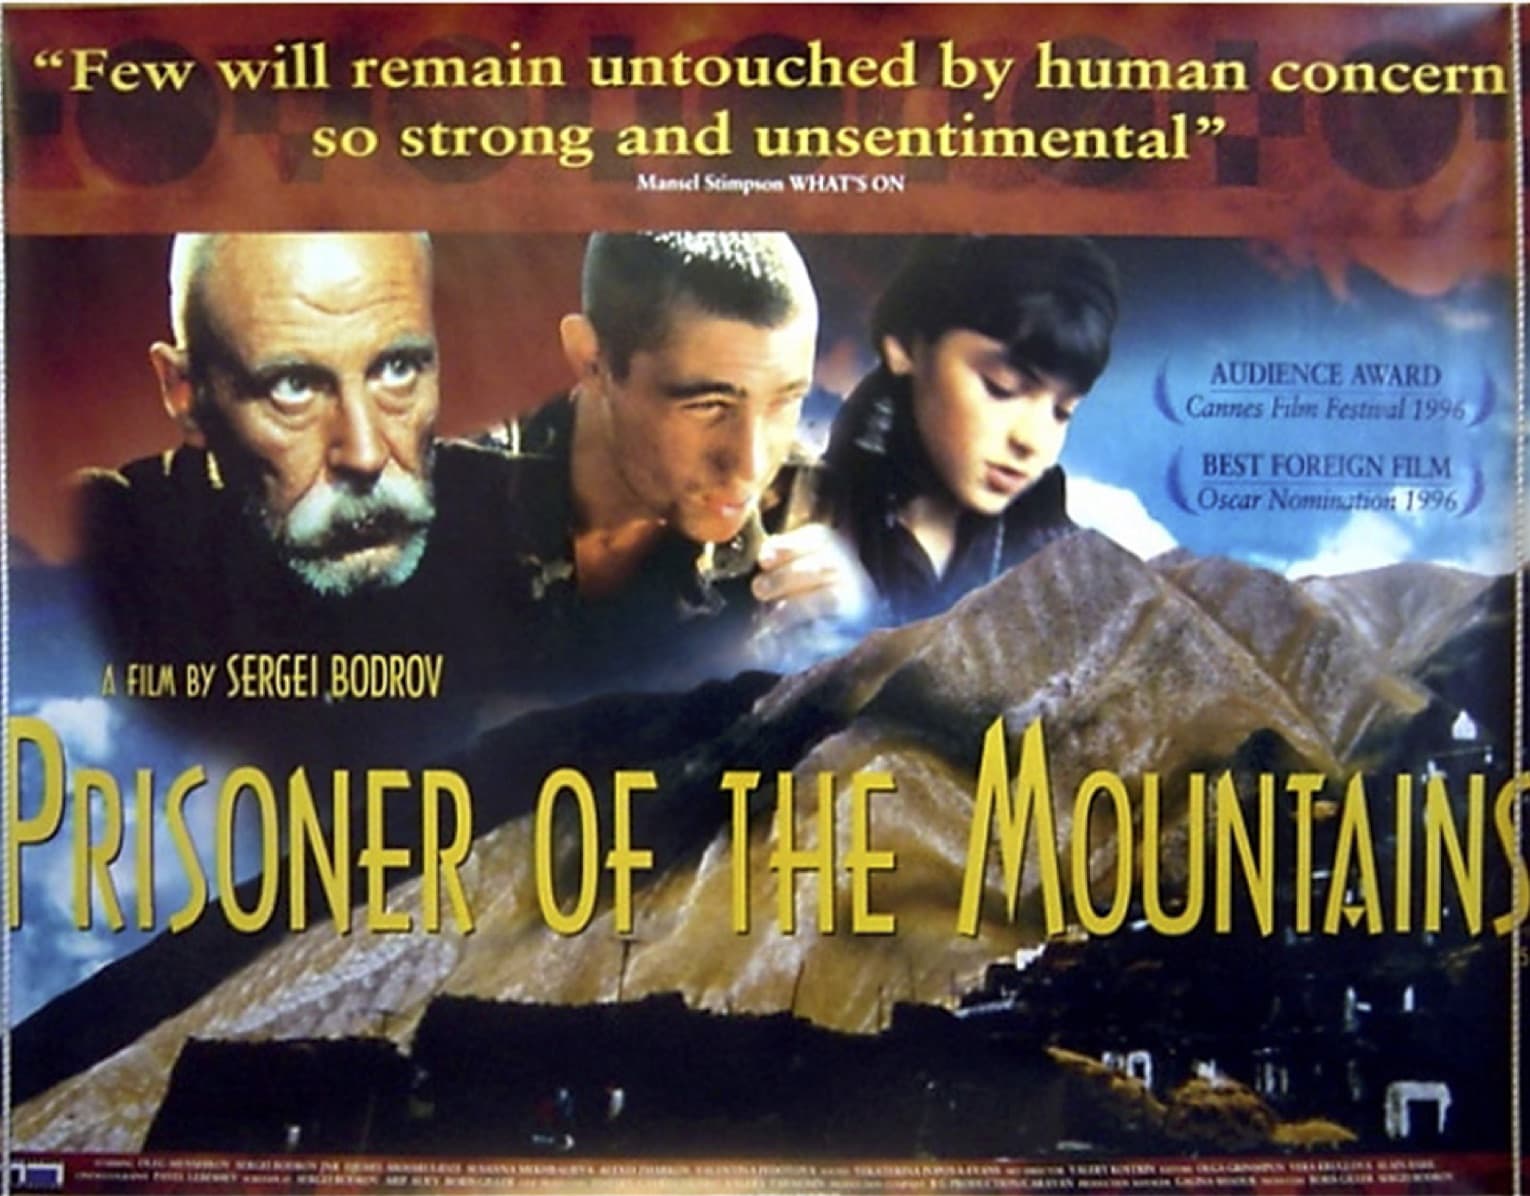 Prisoner of the Mountains movie poster - "Few will remain untouched by human concern so strong and unsentimental."